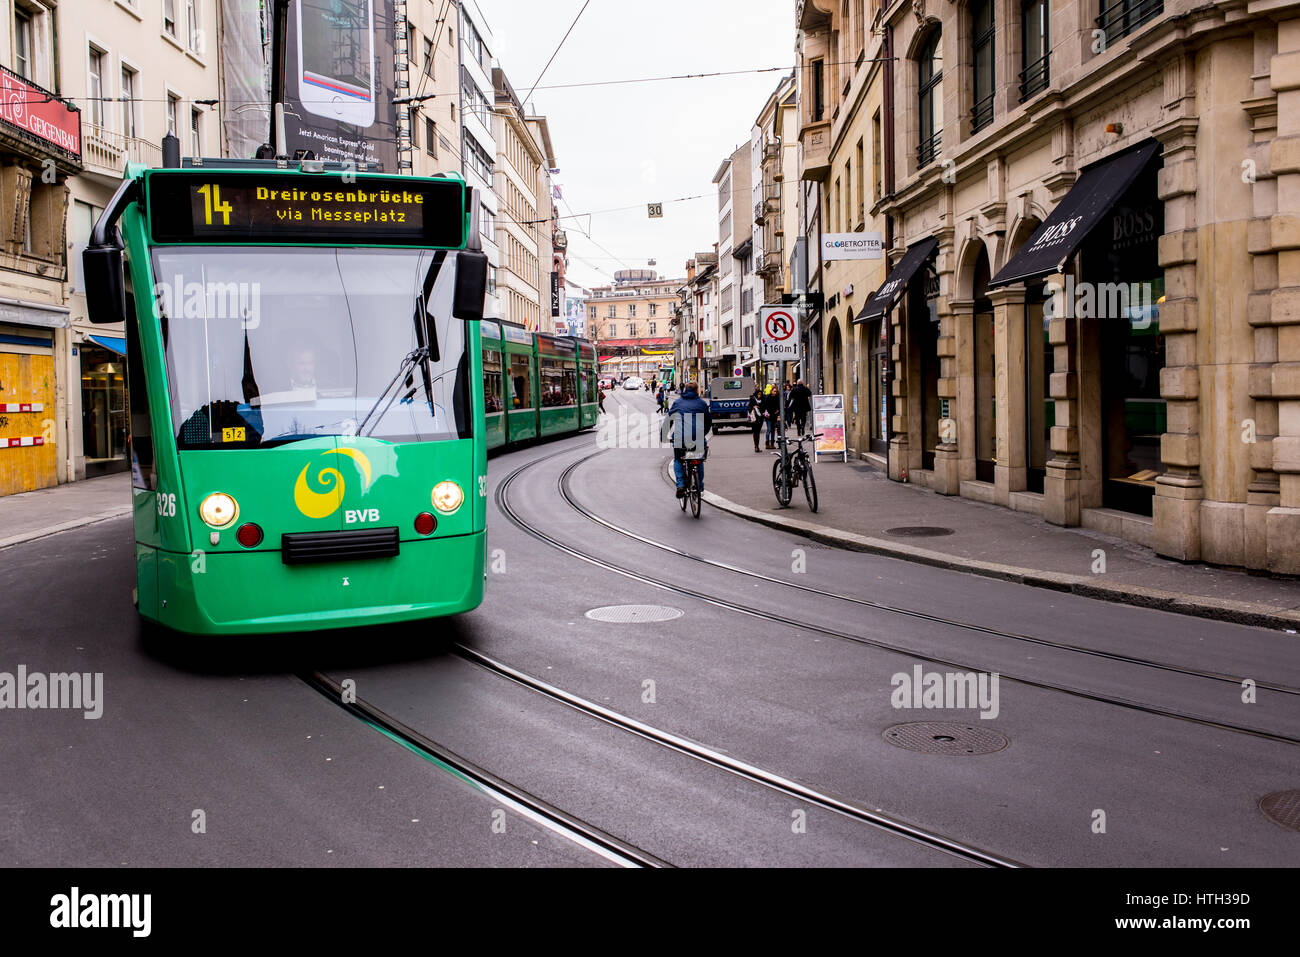 Basel, Switzerland - March 2017: Green tram in street of Basel city center. Basel's green and yellow trams have become an inseparable part of the city Stock Photo